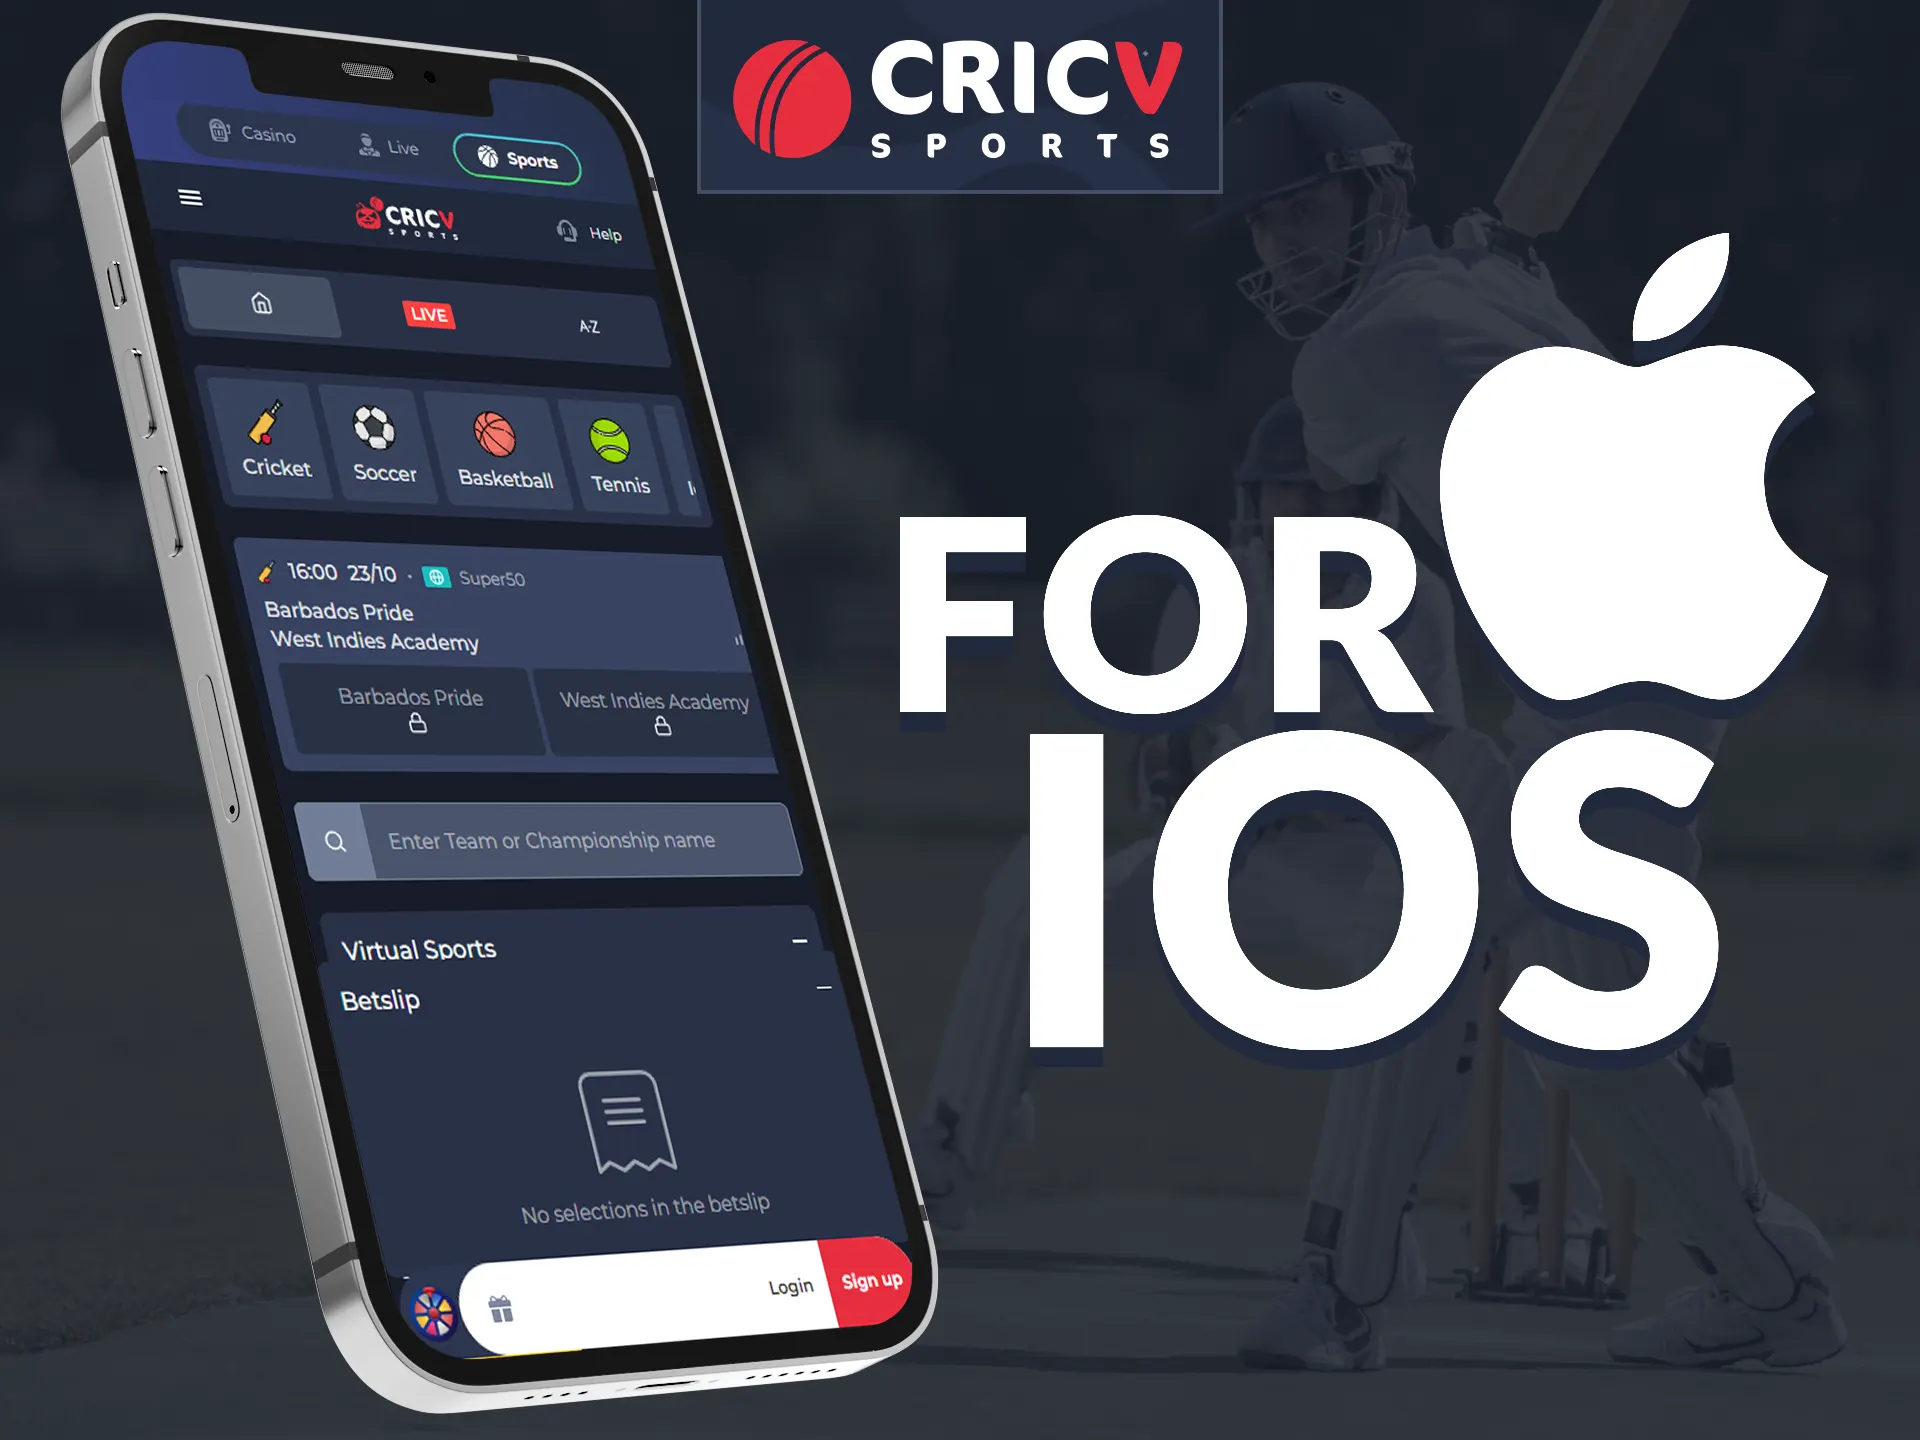 Download the Cricv app to your iOS device.